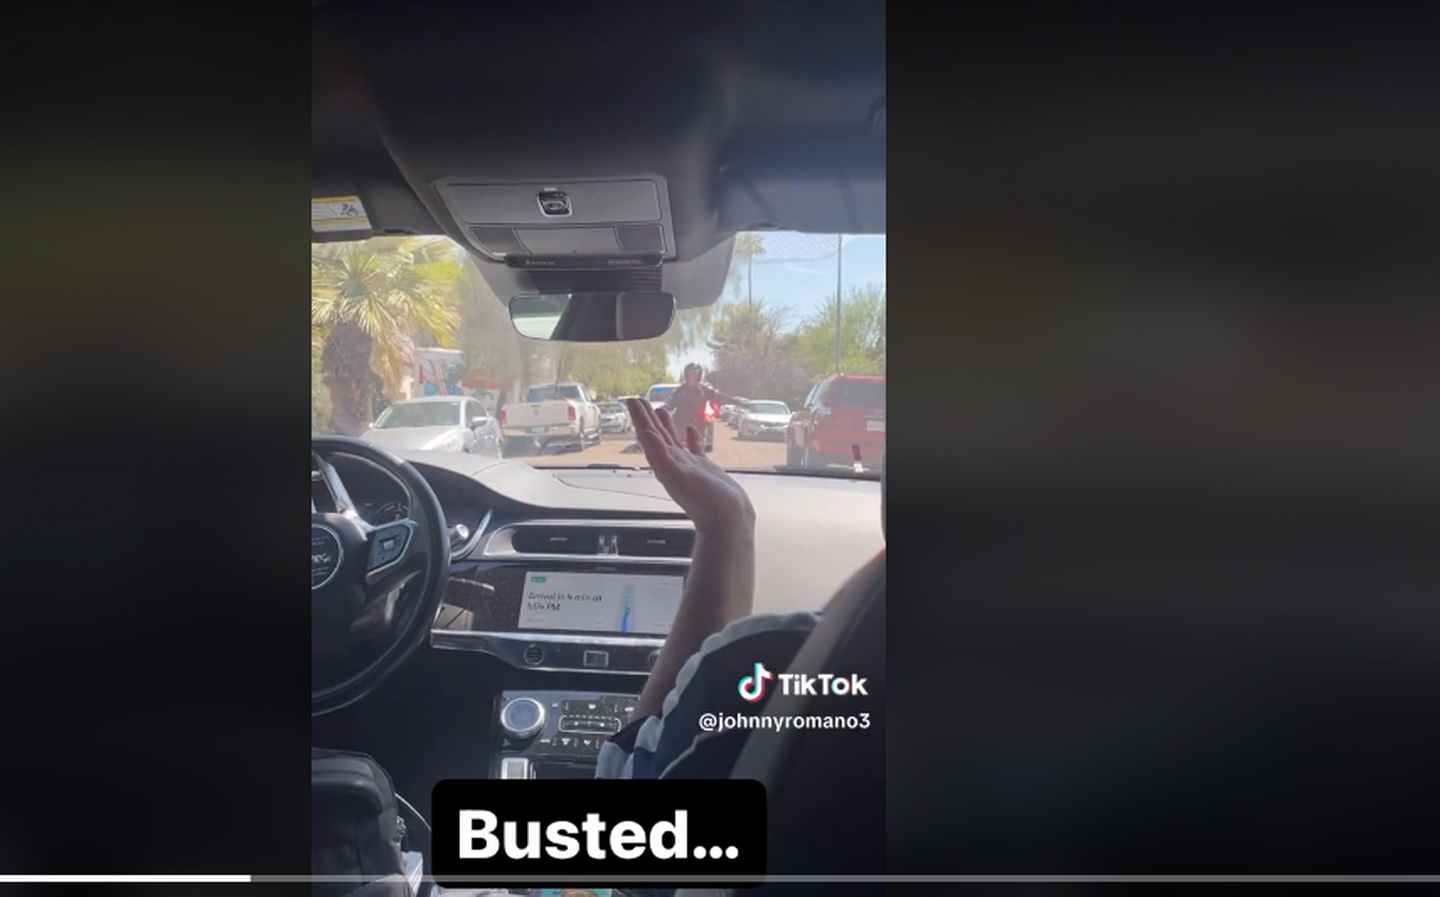 TikTok user @johnnyromano3 captures moment Waymo robotaxi is confused by traffic cop in America